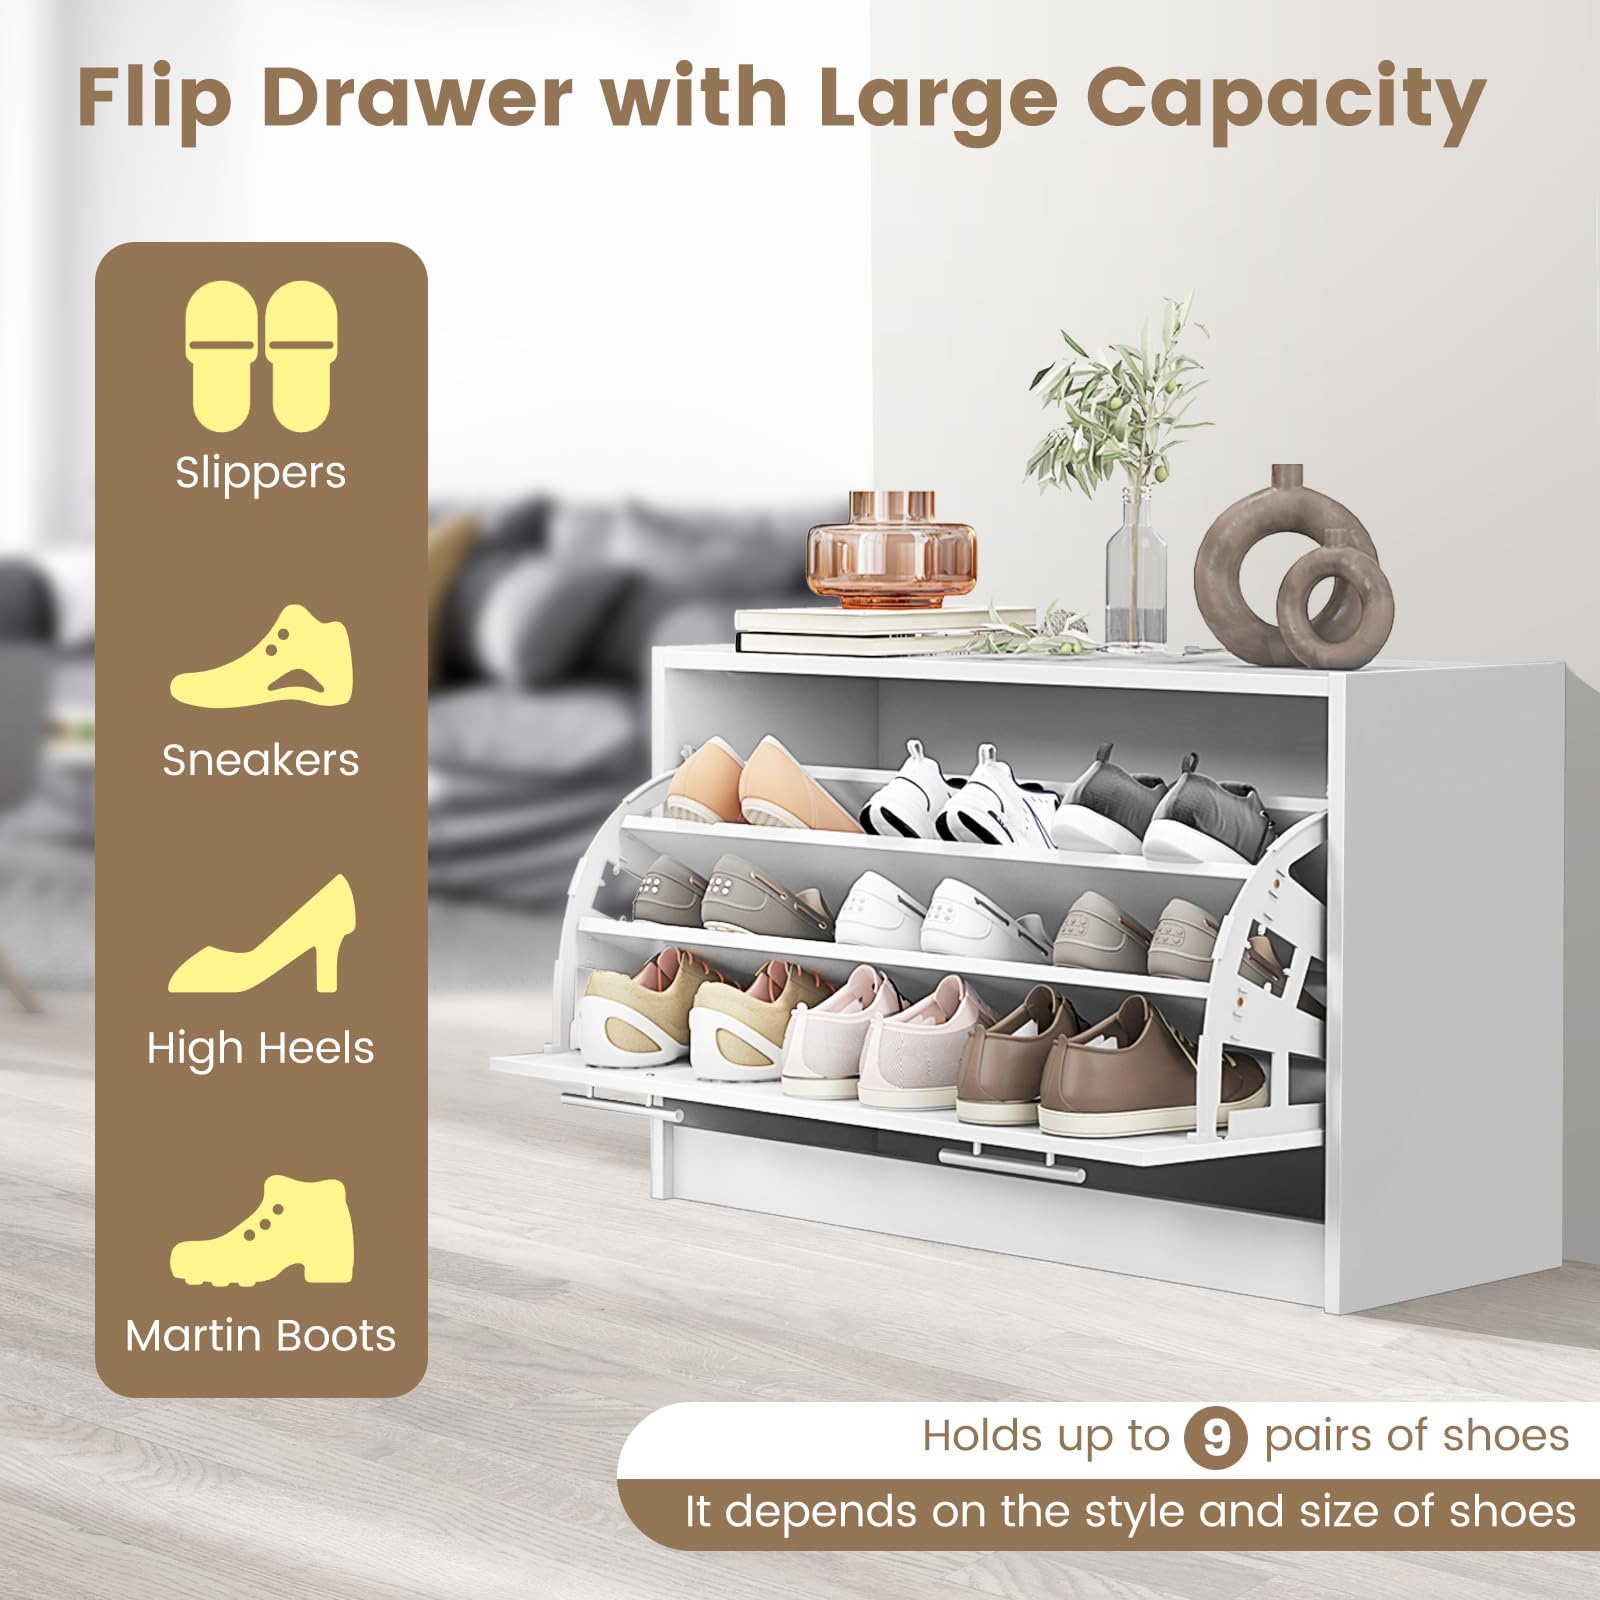 Giantex Shoe Cabinet with Flip Drawer, Shoe Storage Cupboard Organizer with Anti-toppling Device